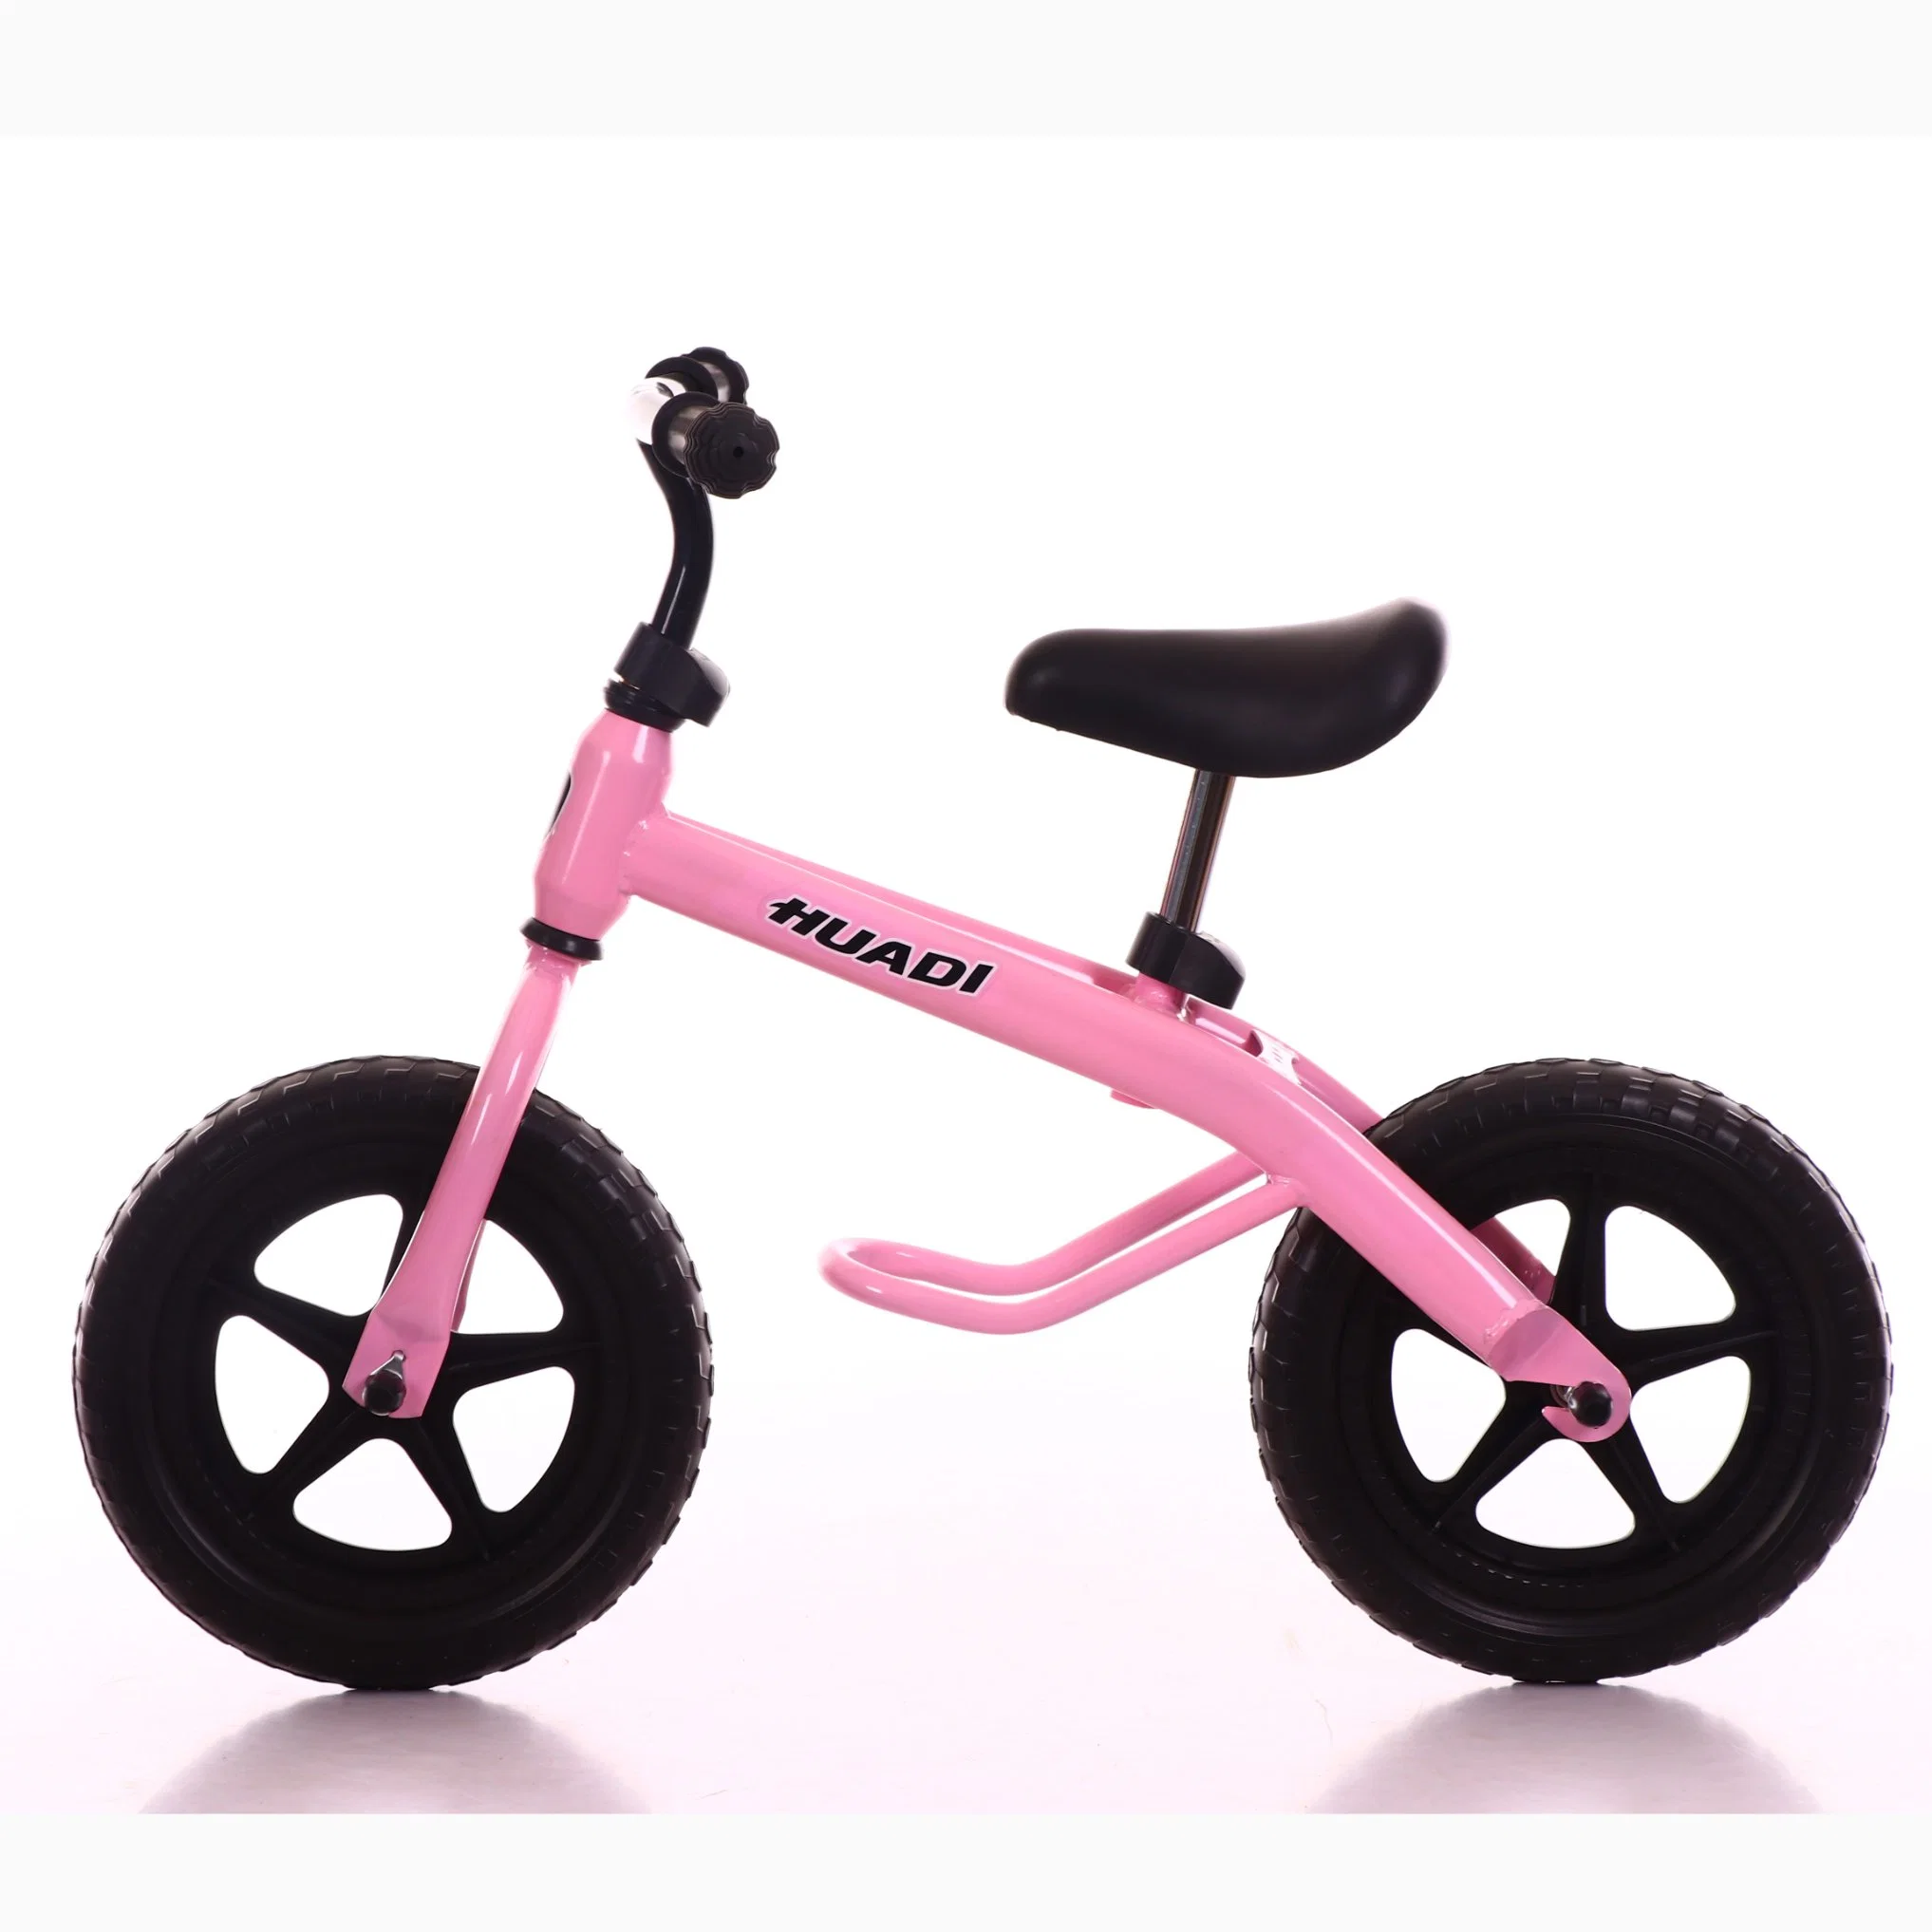 Factory Price Good Quality Kids Blance Bike with PU Seat for Baby Walking Exercise